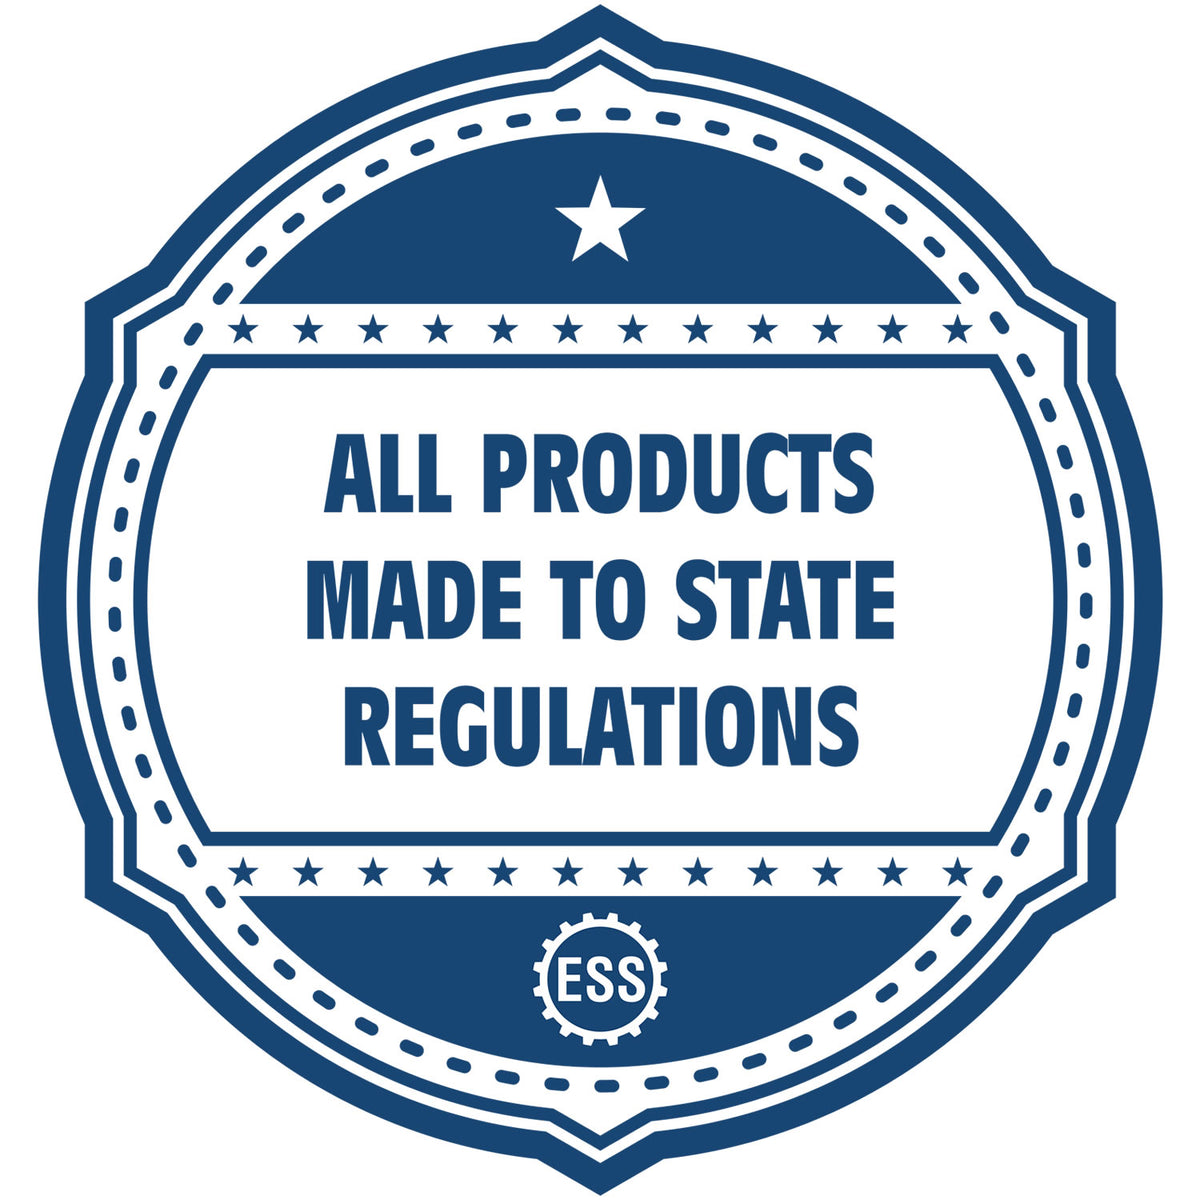 A blue icon or badge for the Massachusetts Professional Geologist Seal Stamp showing that this product is made in compliance with state regulations.